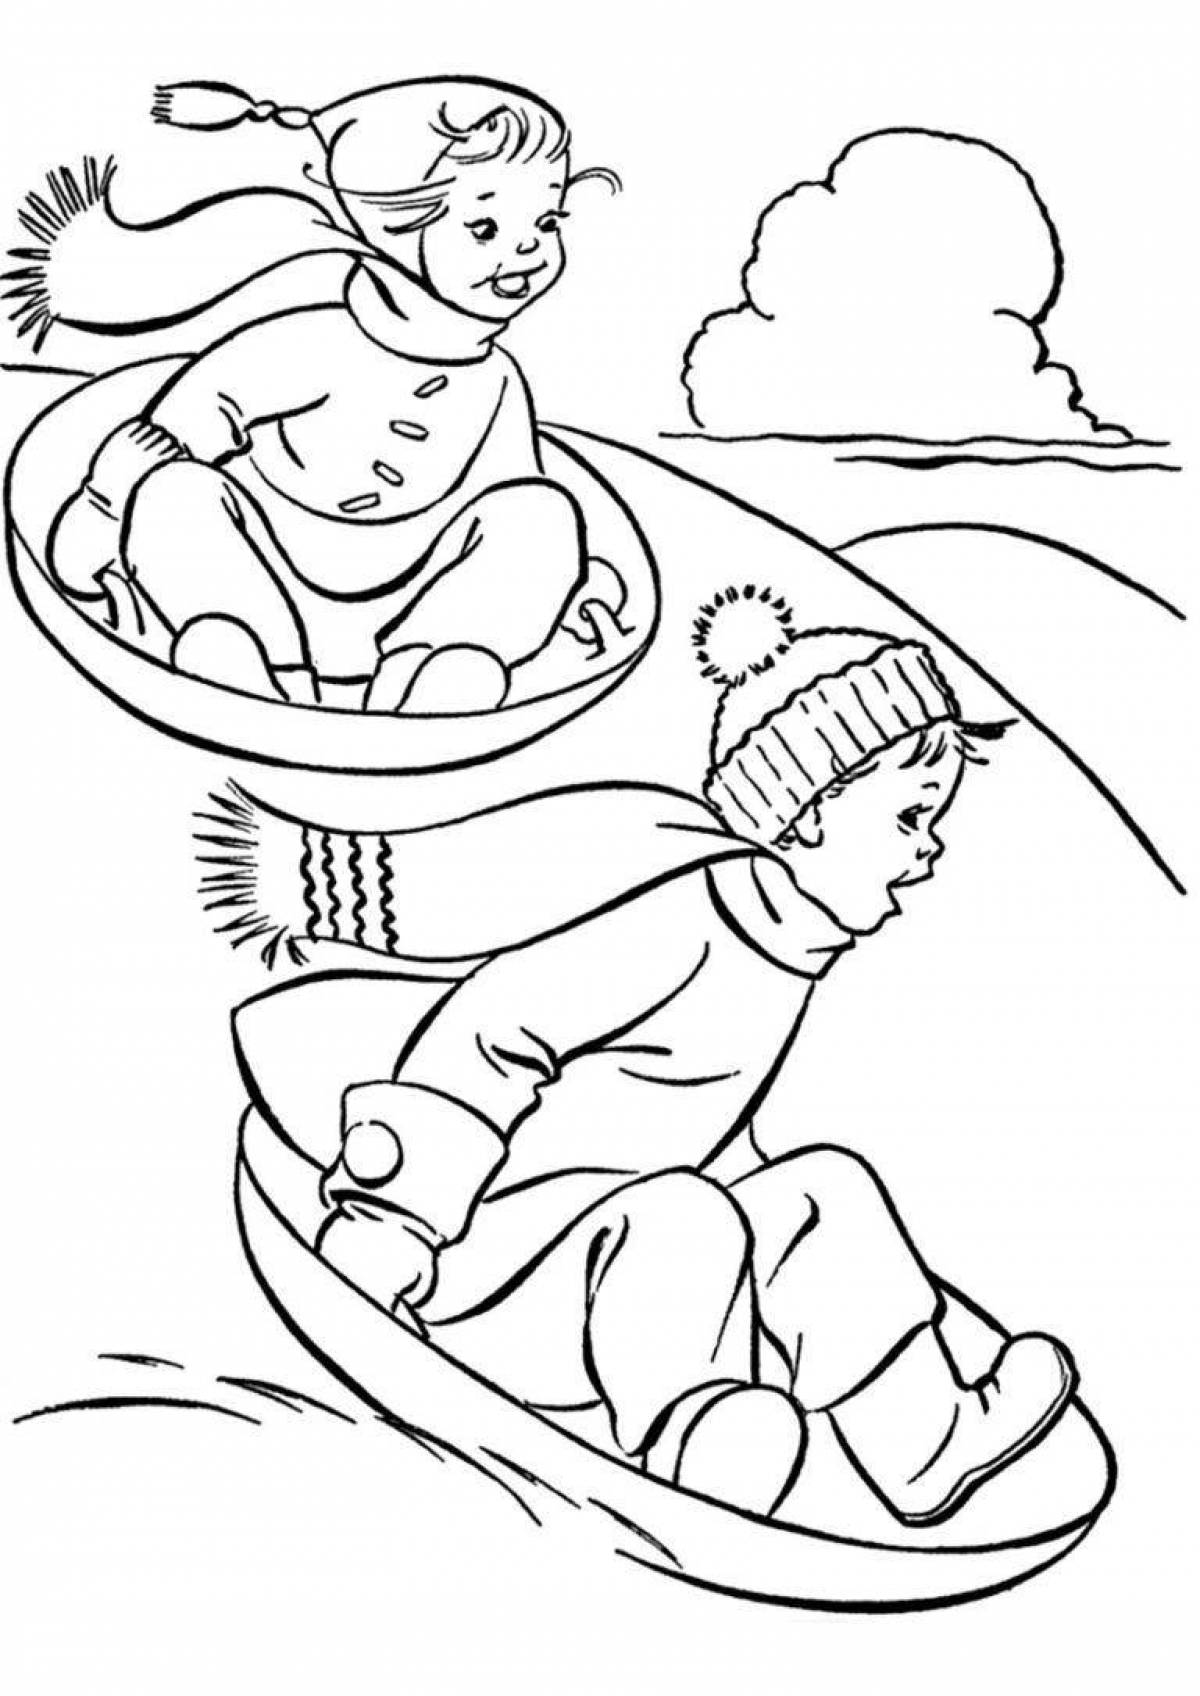 Great coloring book children on the hill in winter